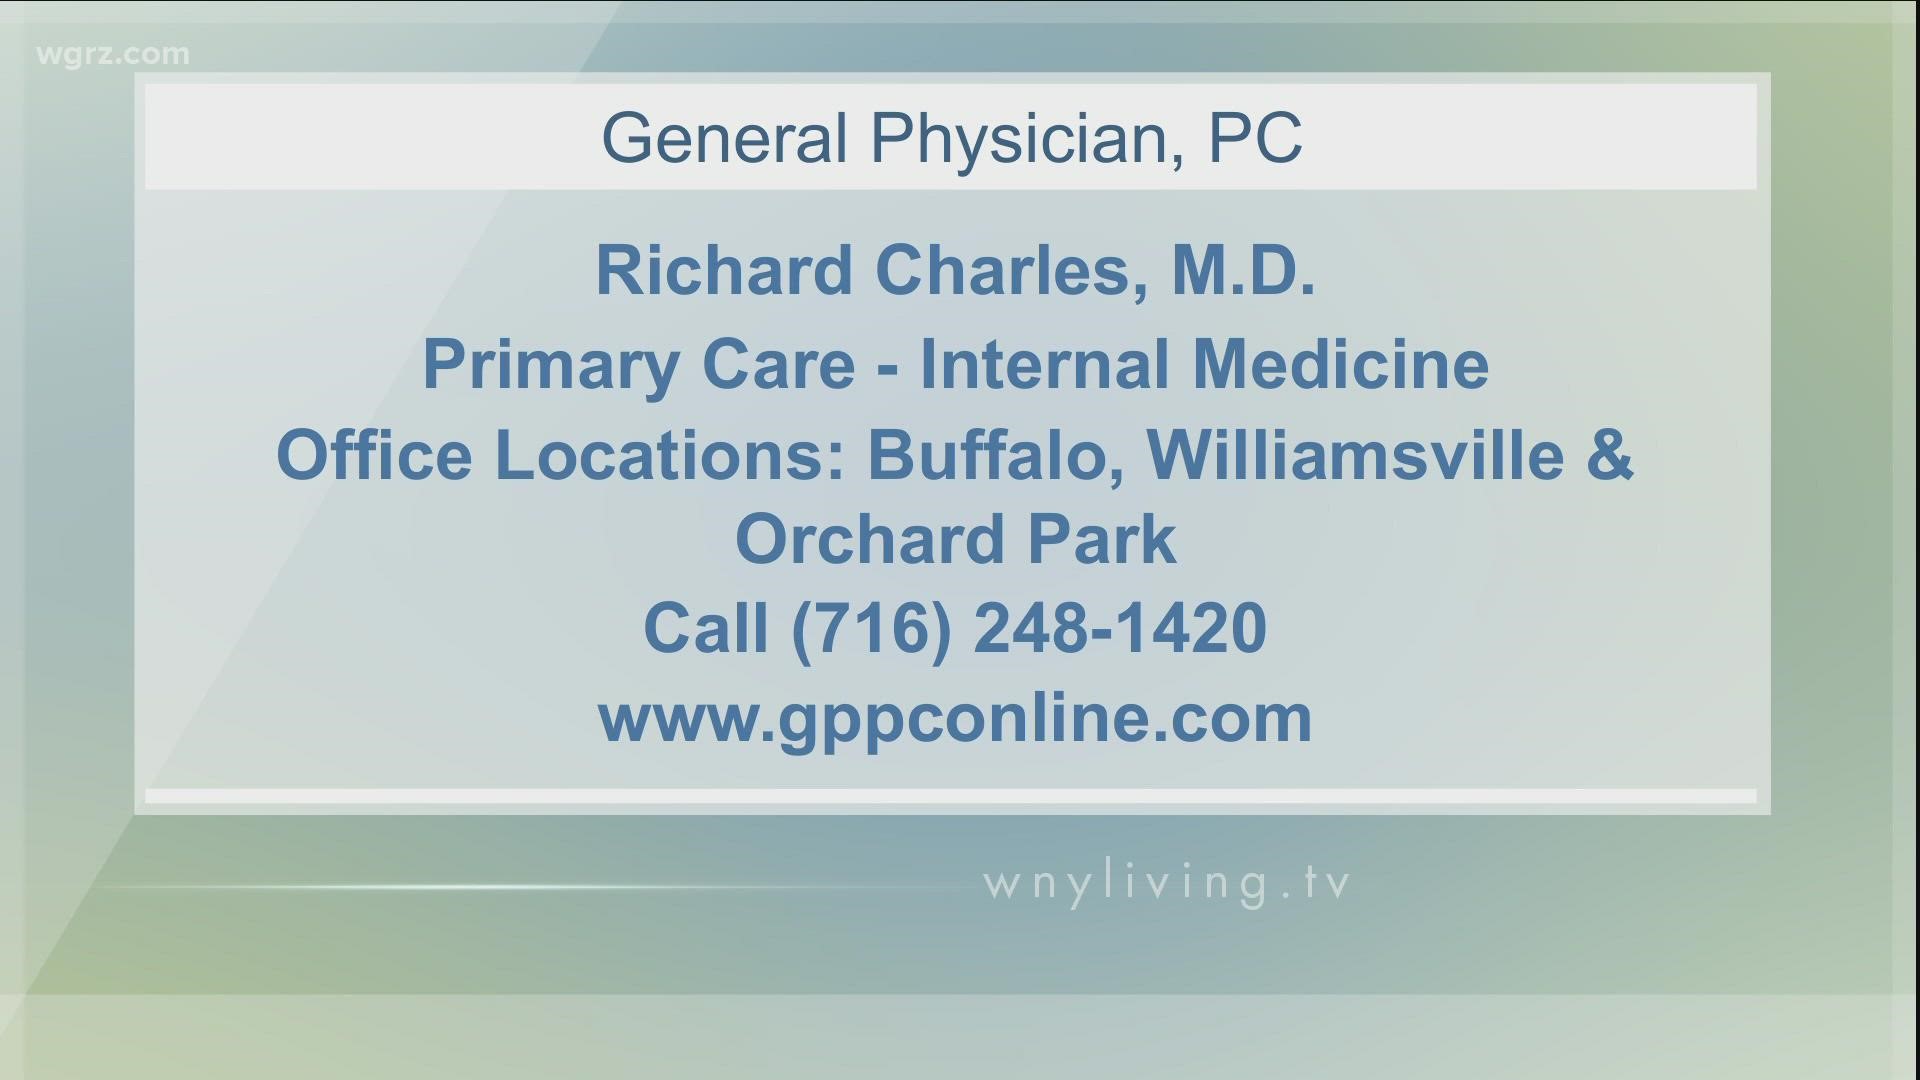 WNY Living - September 25 - General Physician, PC (THIS VIDEO IS SPONSORED BY GENERAL PHYSICIAN, PC)